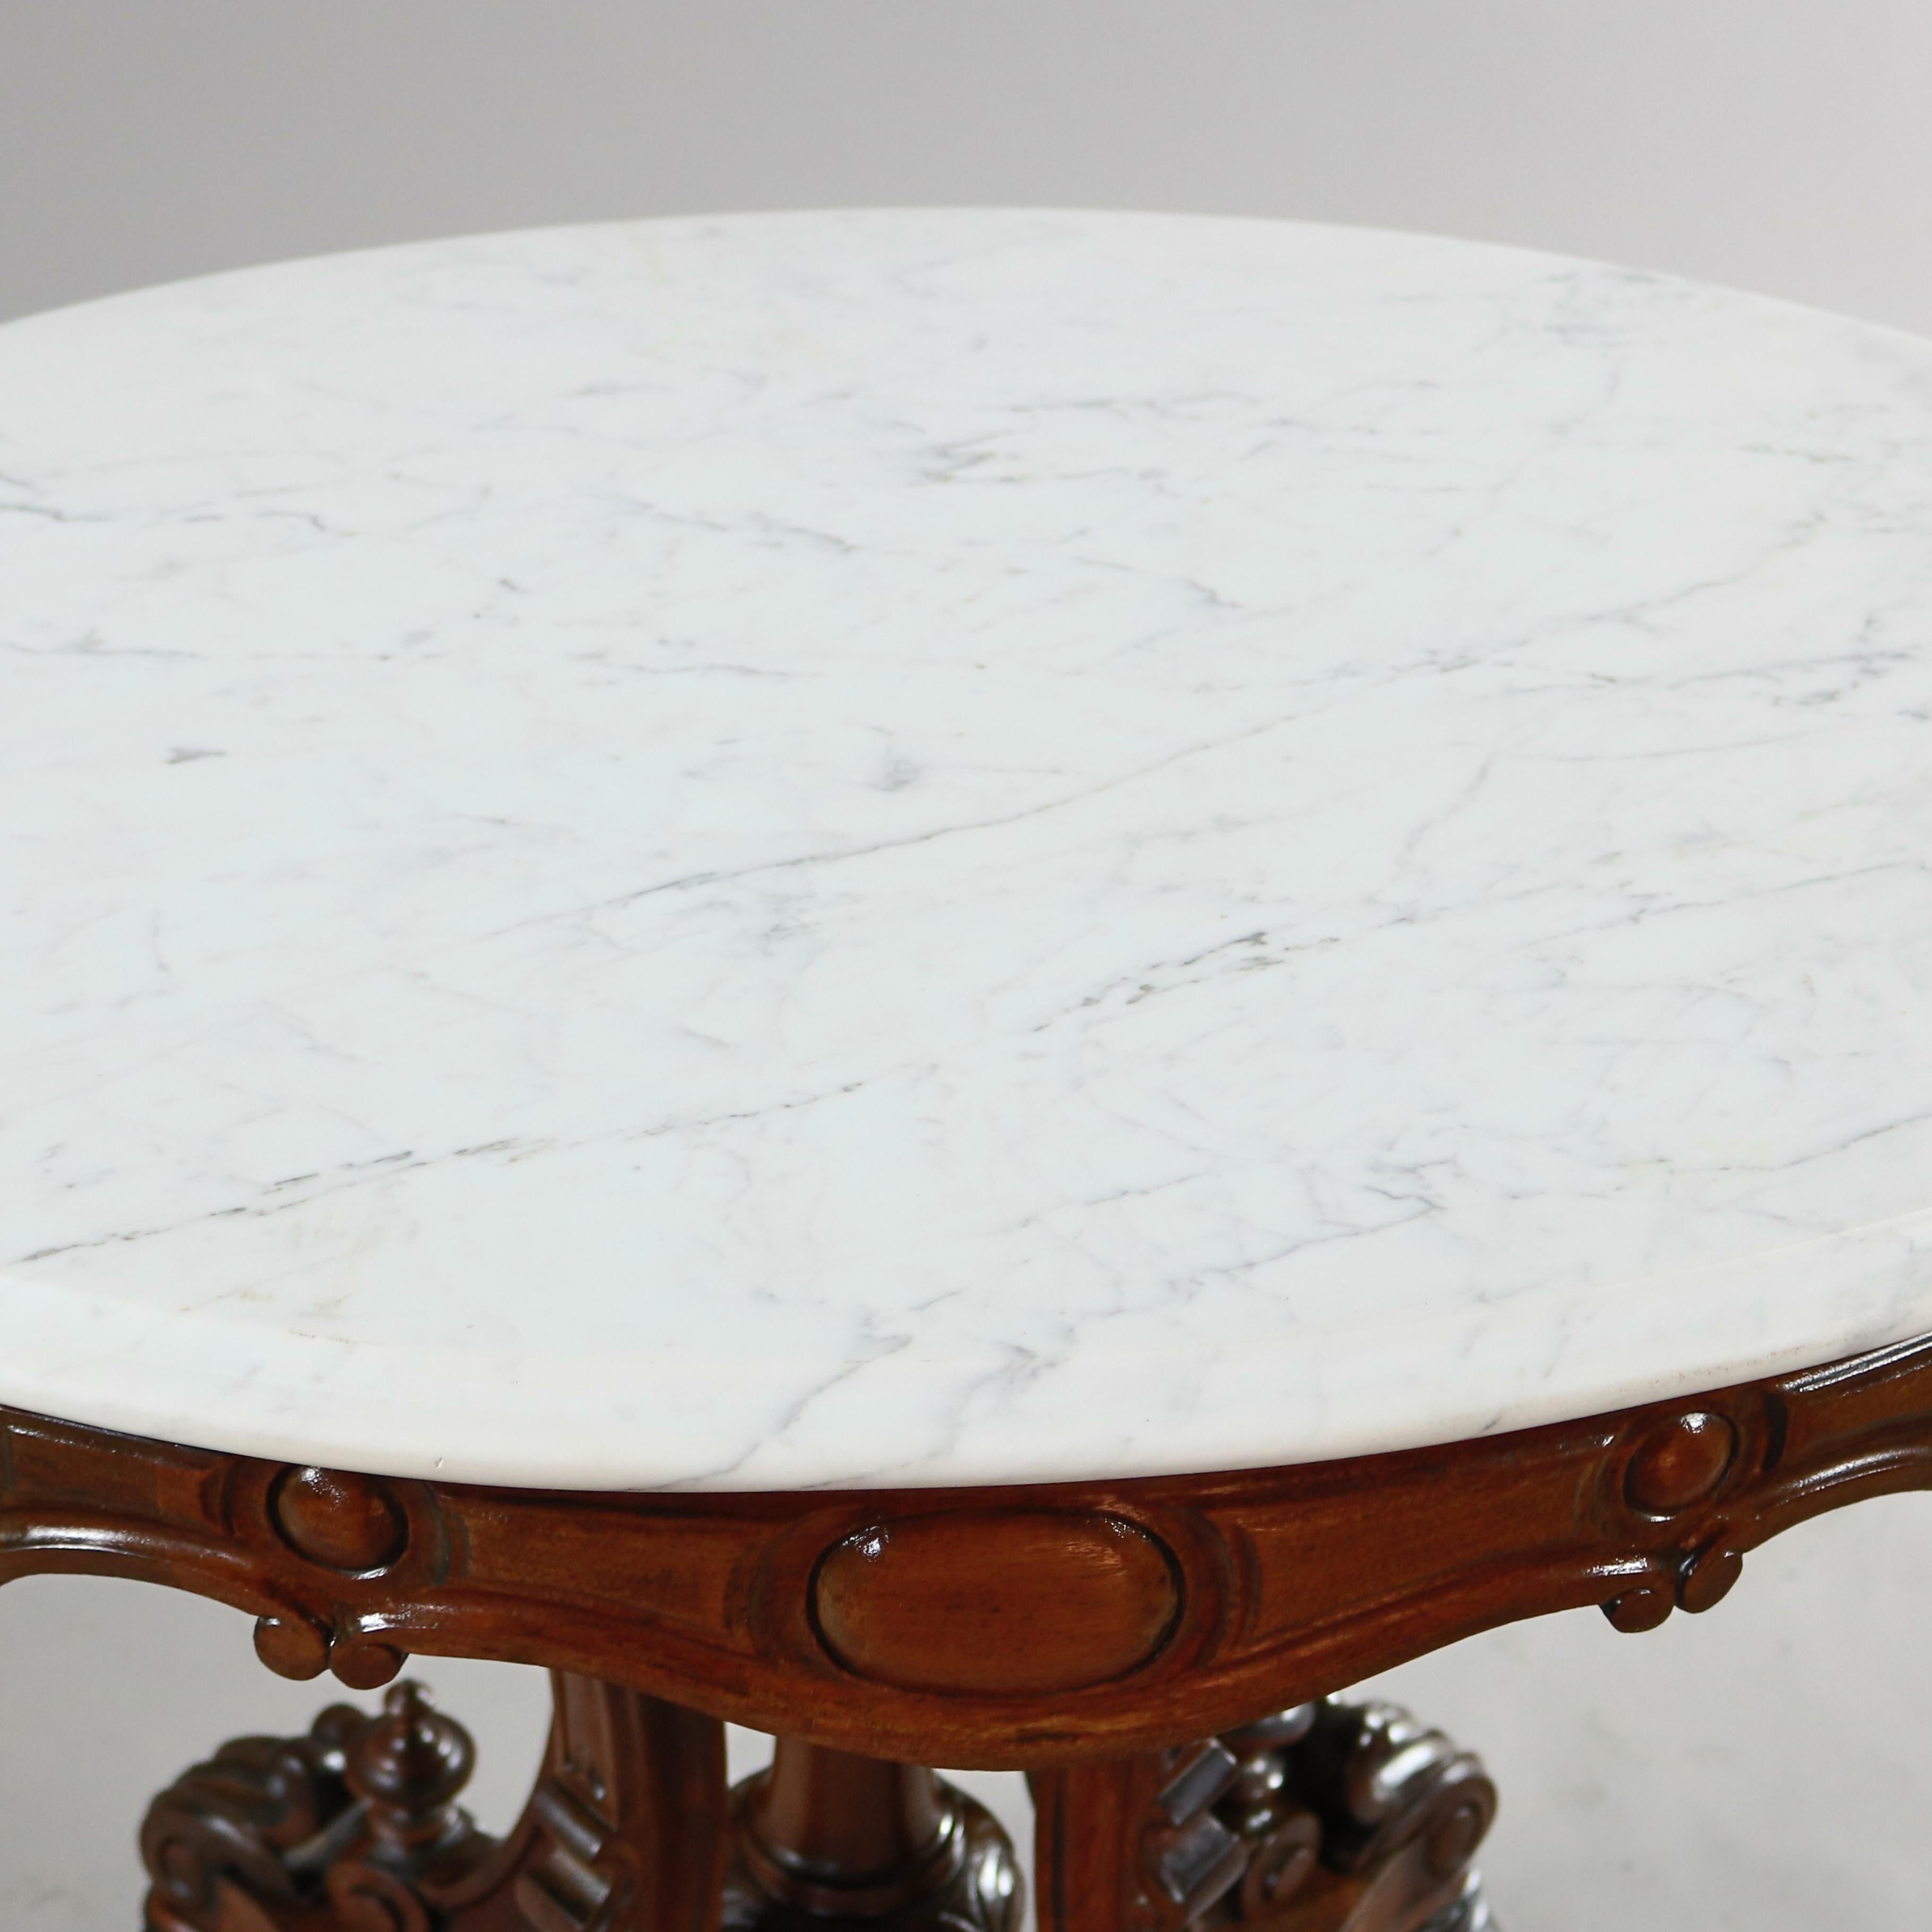 19th Century Antique Renaissance Revival Carved Walnut & Marble Center Table, circa 1880 